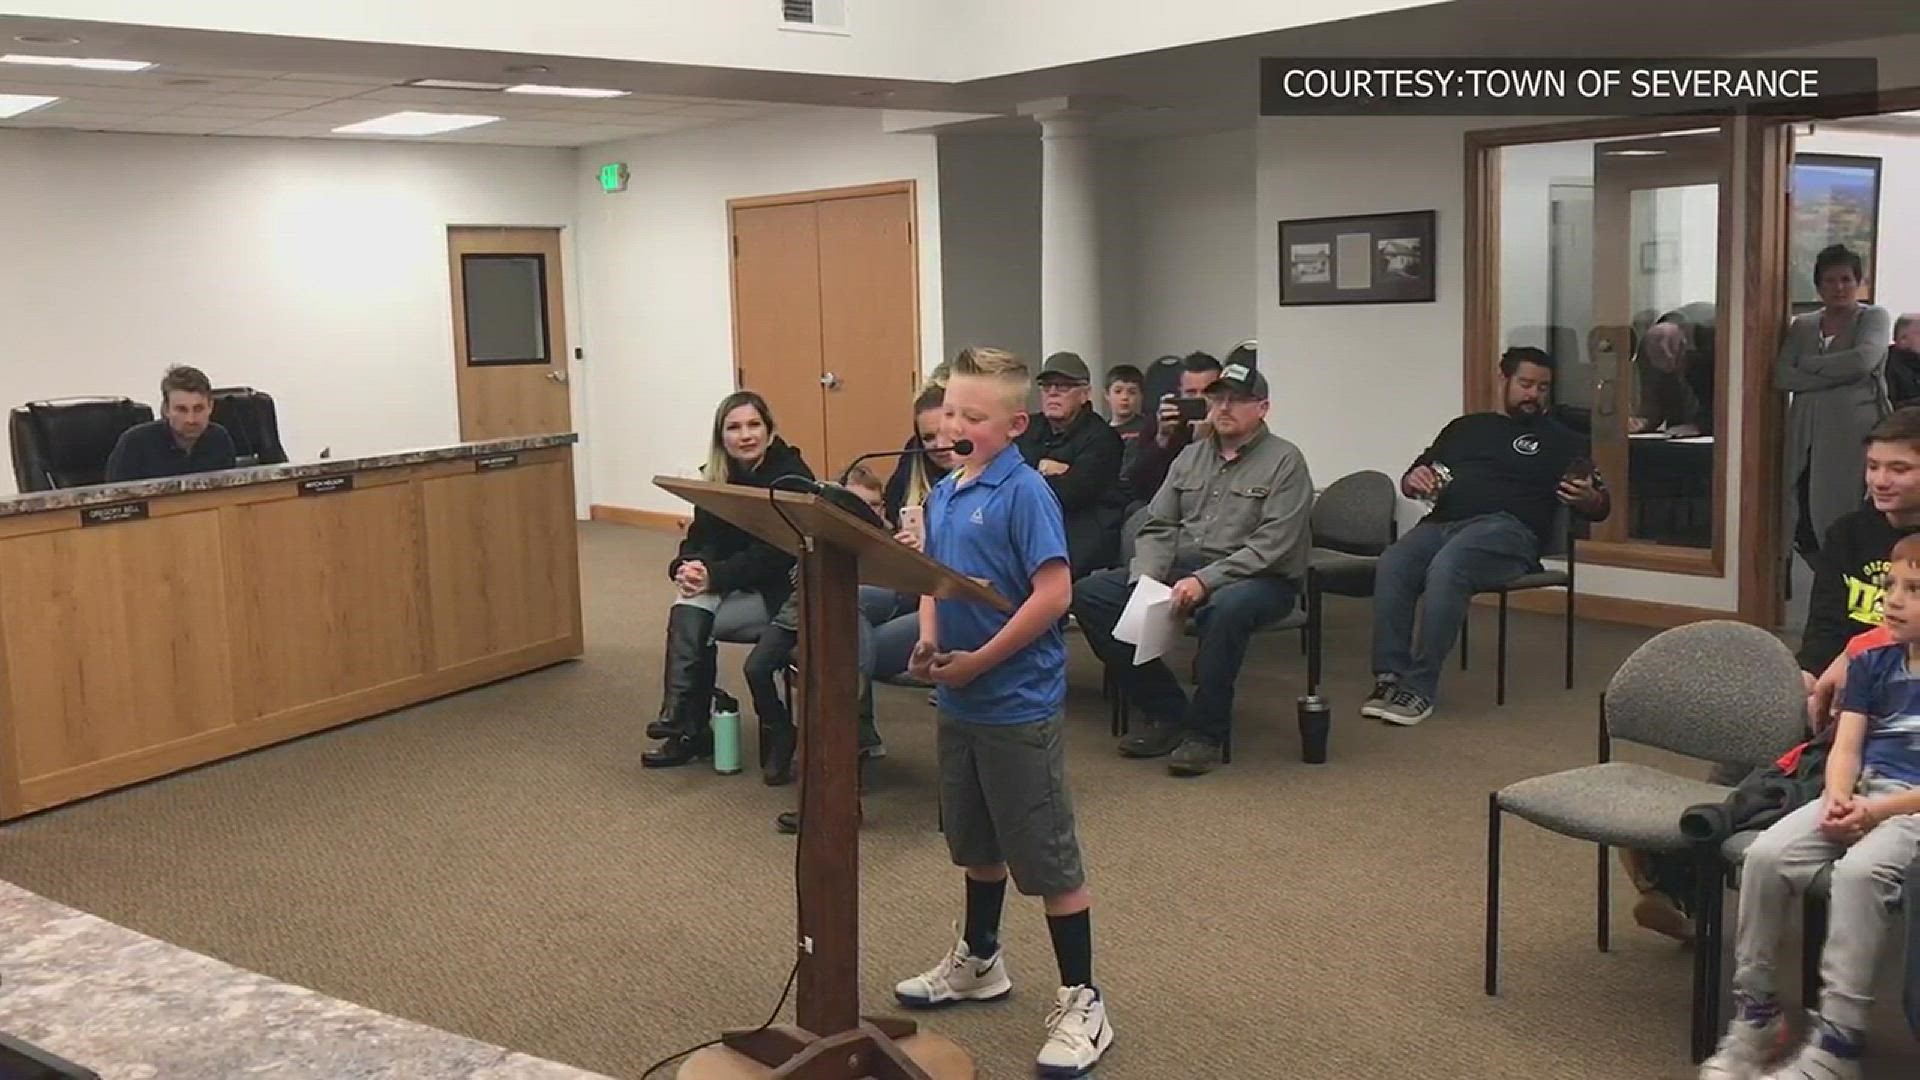 An elementary school student in the small town of Severance is fighting to make snowball fights legal within the town. An old law that's still on the books makes them illegal.